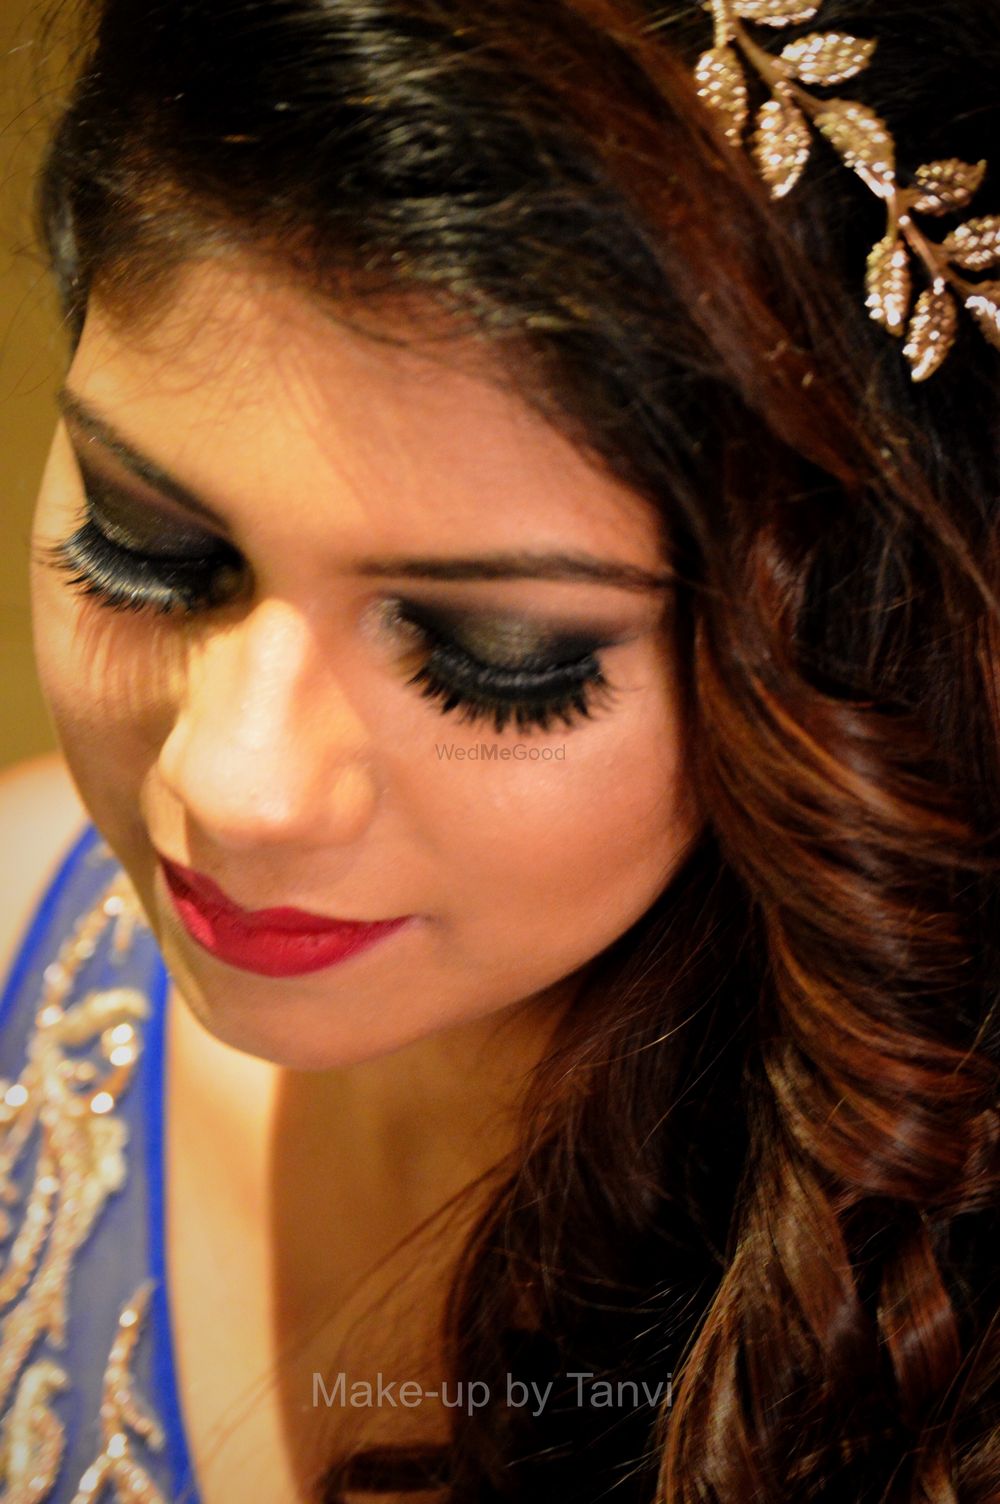 Photo From Pooja {Engagement, Vidhi & Reception} - By Makeup by Tanvi